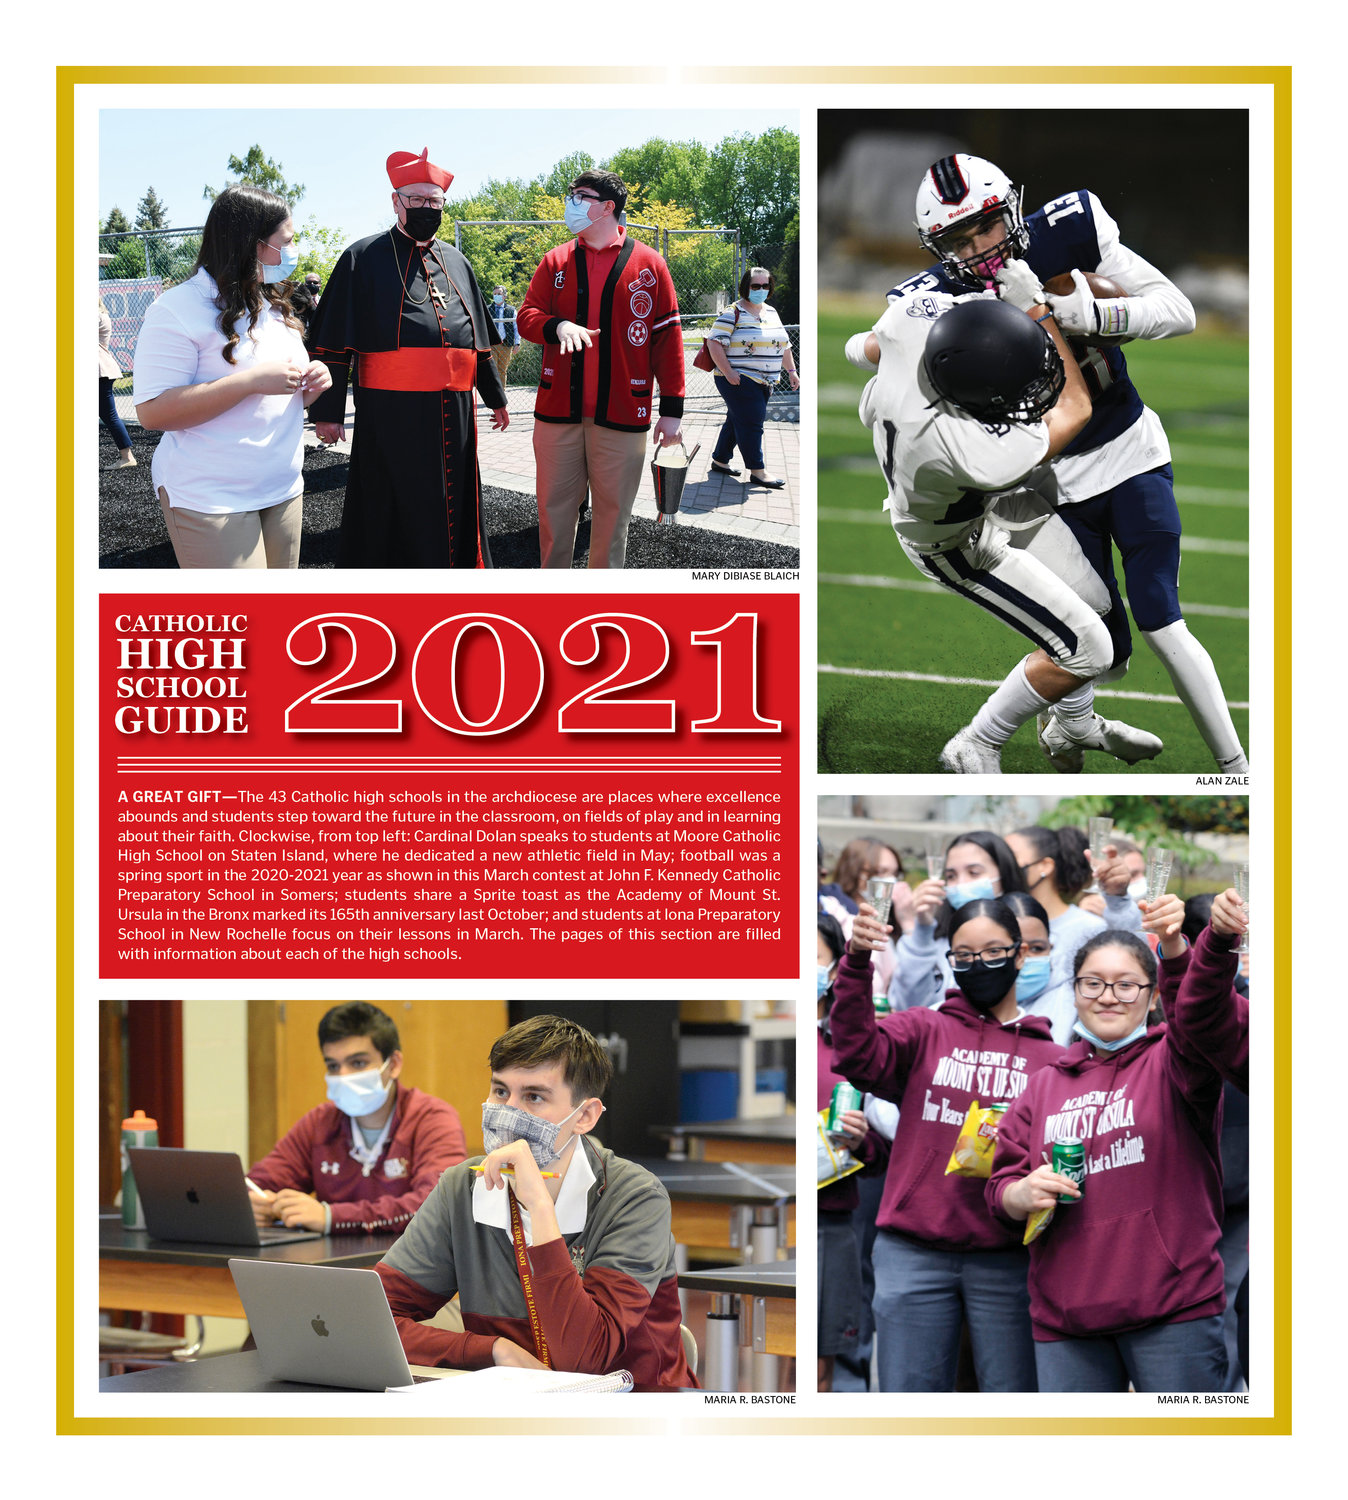 A GREAT GIFT—The 43 Catholic high schools in the archdiocese are places where excellence abounds and students step toward the future in the classroom, on fields of play and in learning about their faith. Clockwise, from top left: Cardinal Dolan speaks to students at Moore Catholic High School on Staten Island, where he dedicated a new athletic field in May; football was a spring sport in the 2020-2021 year as shown in this March contest at John F. Kennedy Catholic Preparatory School in Somers; students share a Sprite toast as the Academy of Mount St. Ursula in the Bronx marked its 165th anniversary last October; and students at Iona Preparatory School in New Rochelle focus on their lessons in March. The pages of this section are filled with information about each of the high schools.